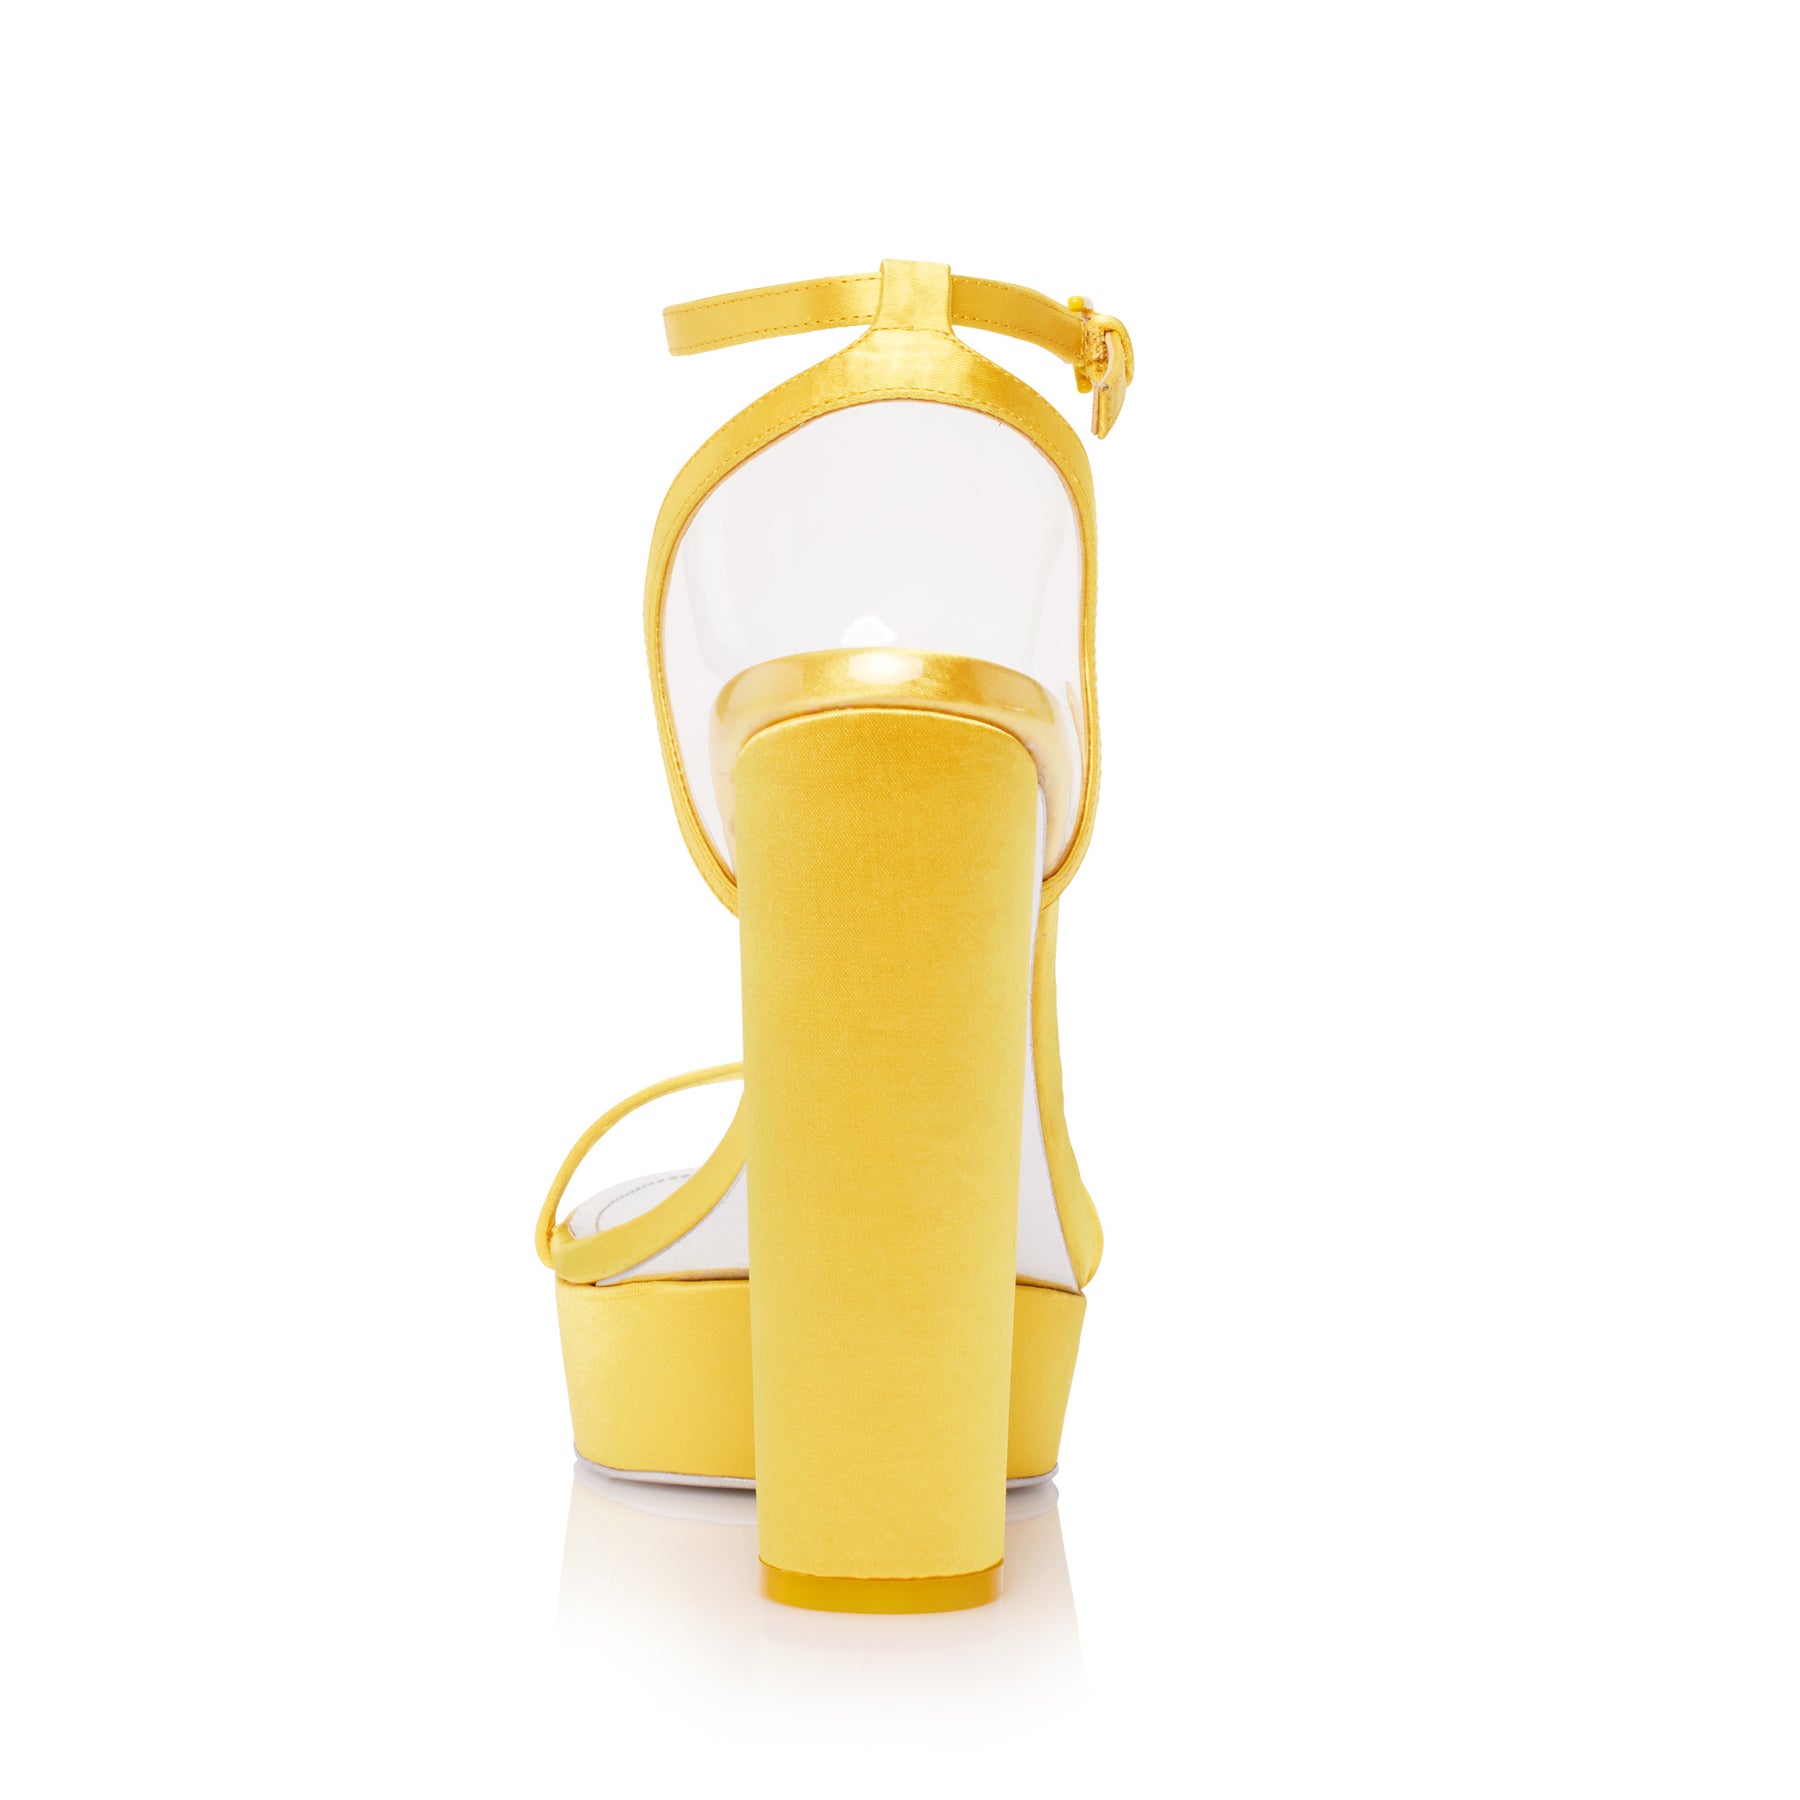 Back of the Platform Sandal luxury shoes from Jessica Rich in yellow.